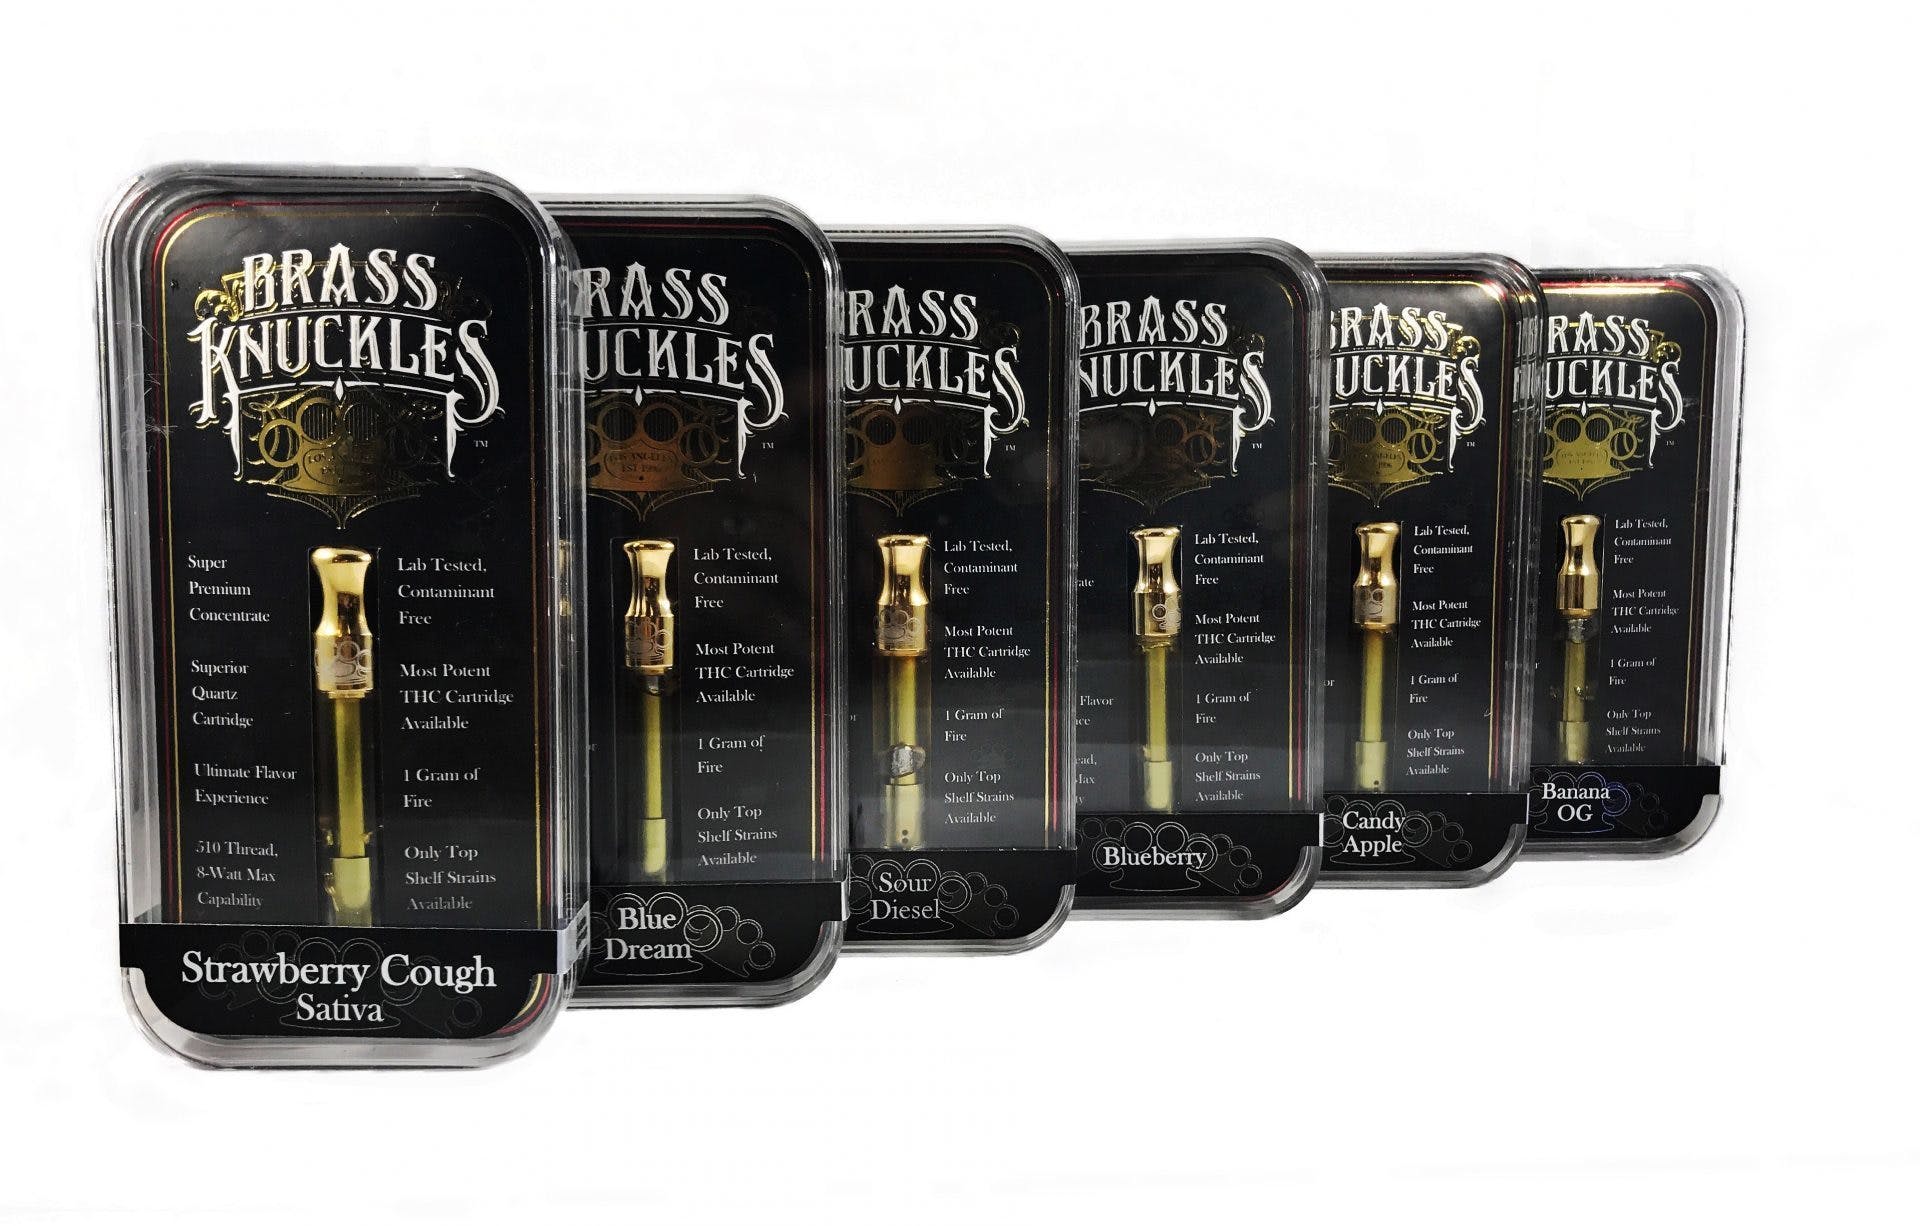 concentrate-brass-knuckles-abracadabra-cartridge-3-for-90-mix-a-match